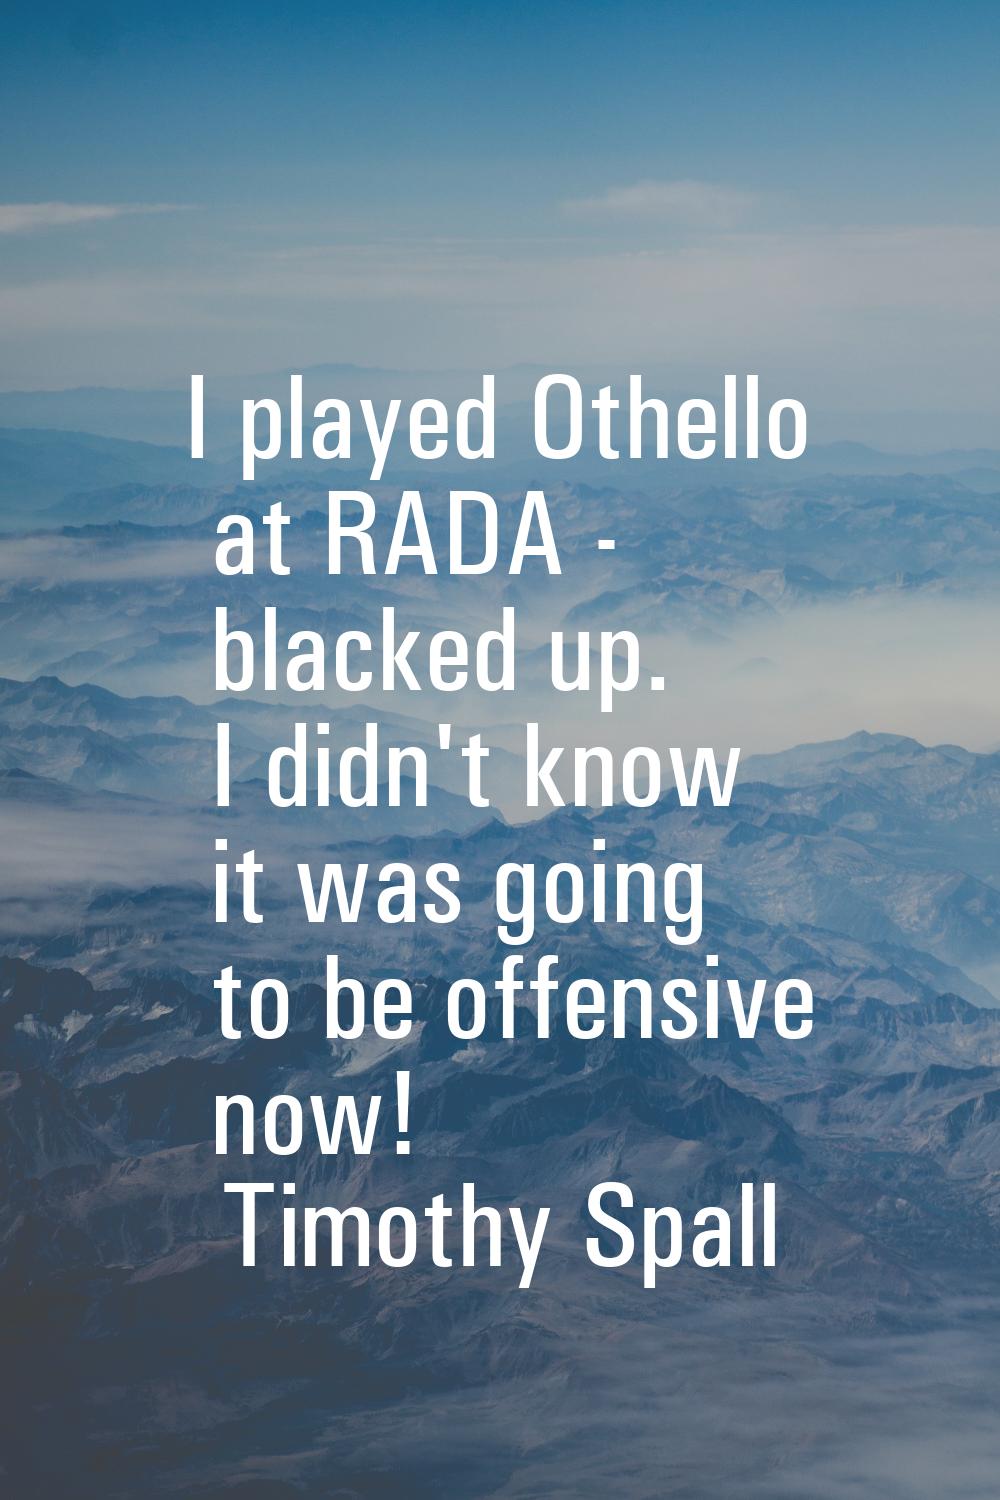 I played Othello at RADA - blacked up. I didn't know it was going to be offensive now!